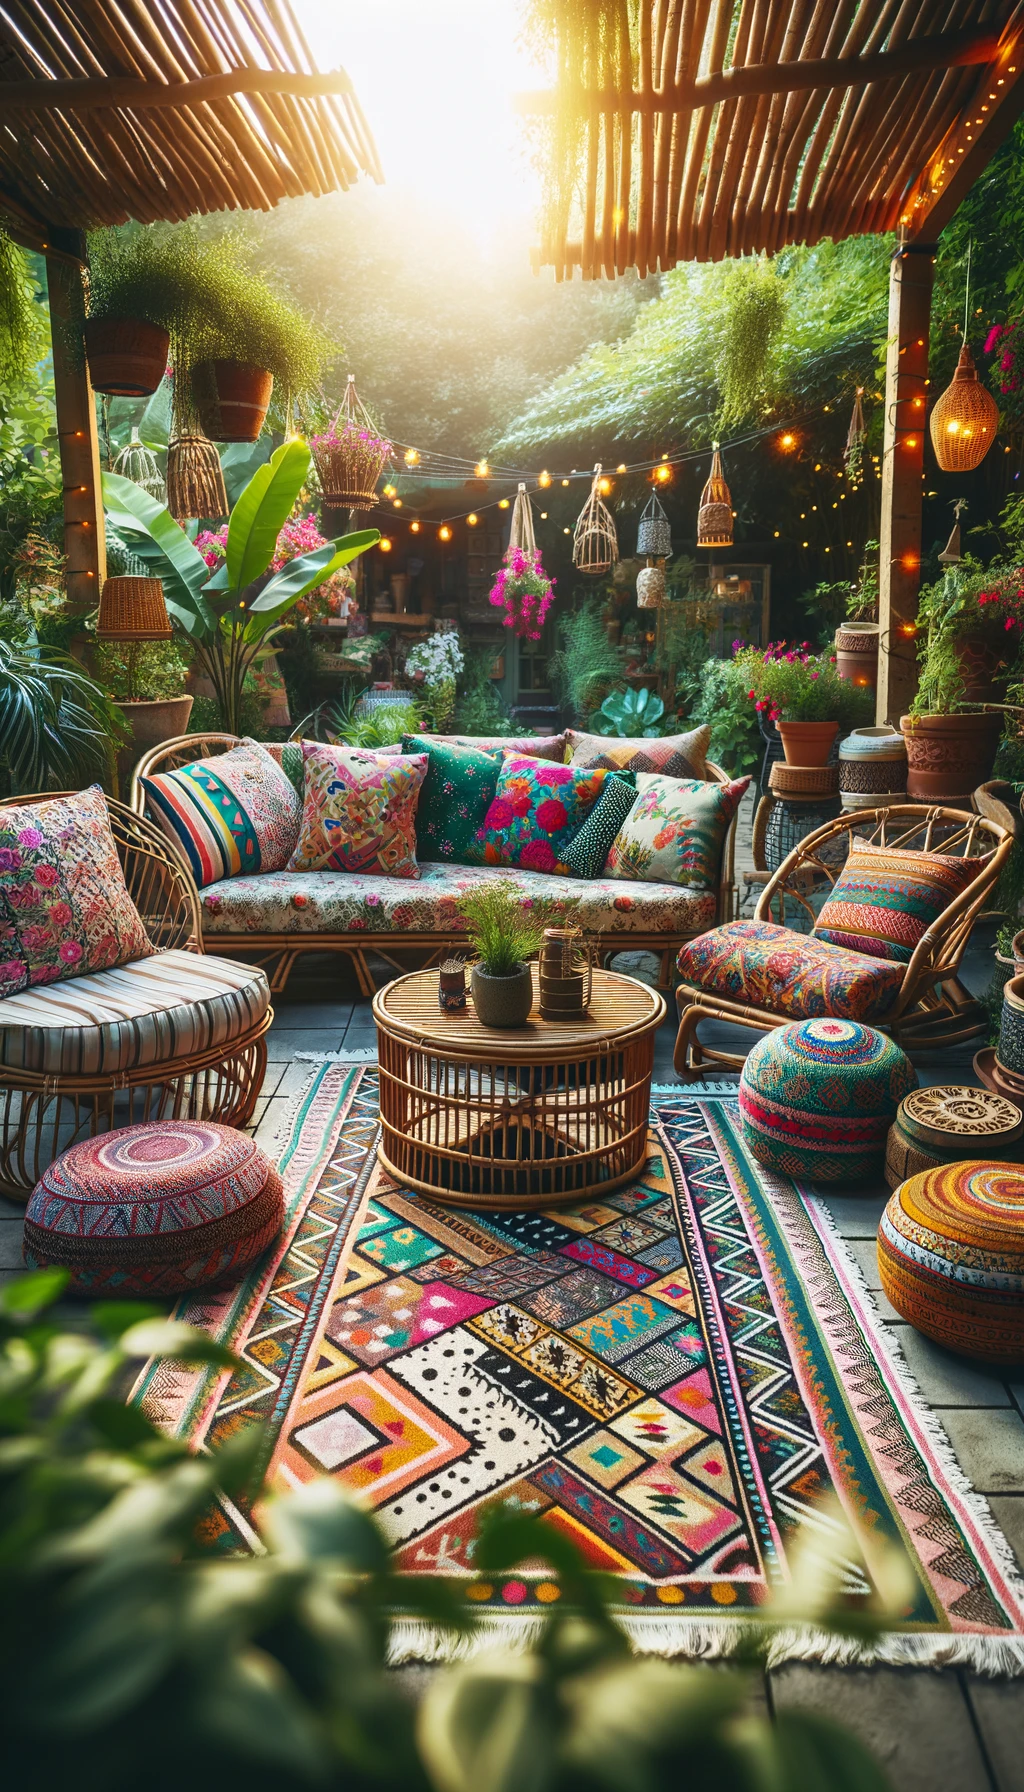 boho patio in a lush garden. It features a vibrant mix of floral and geometric patterns on cushions, tribal design rugs, and a setting that embodies a warm, inviting boho style. 